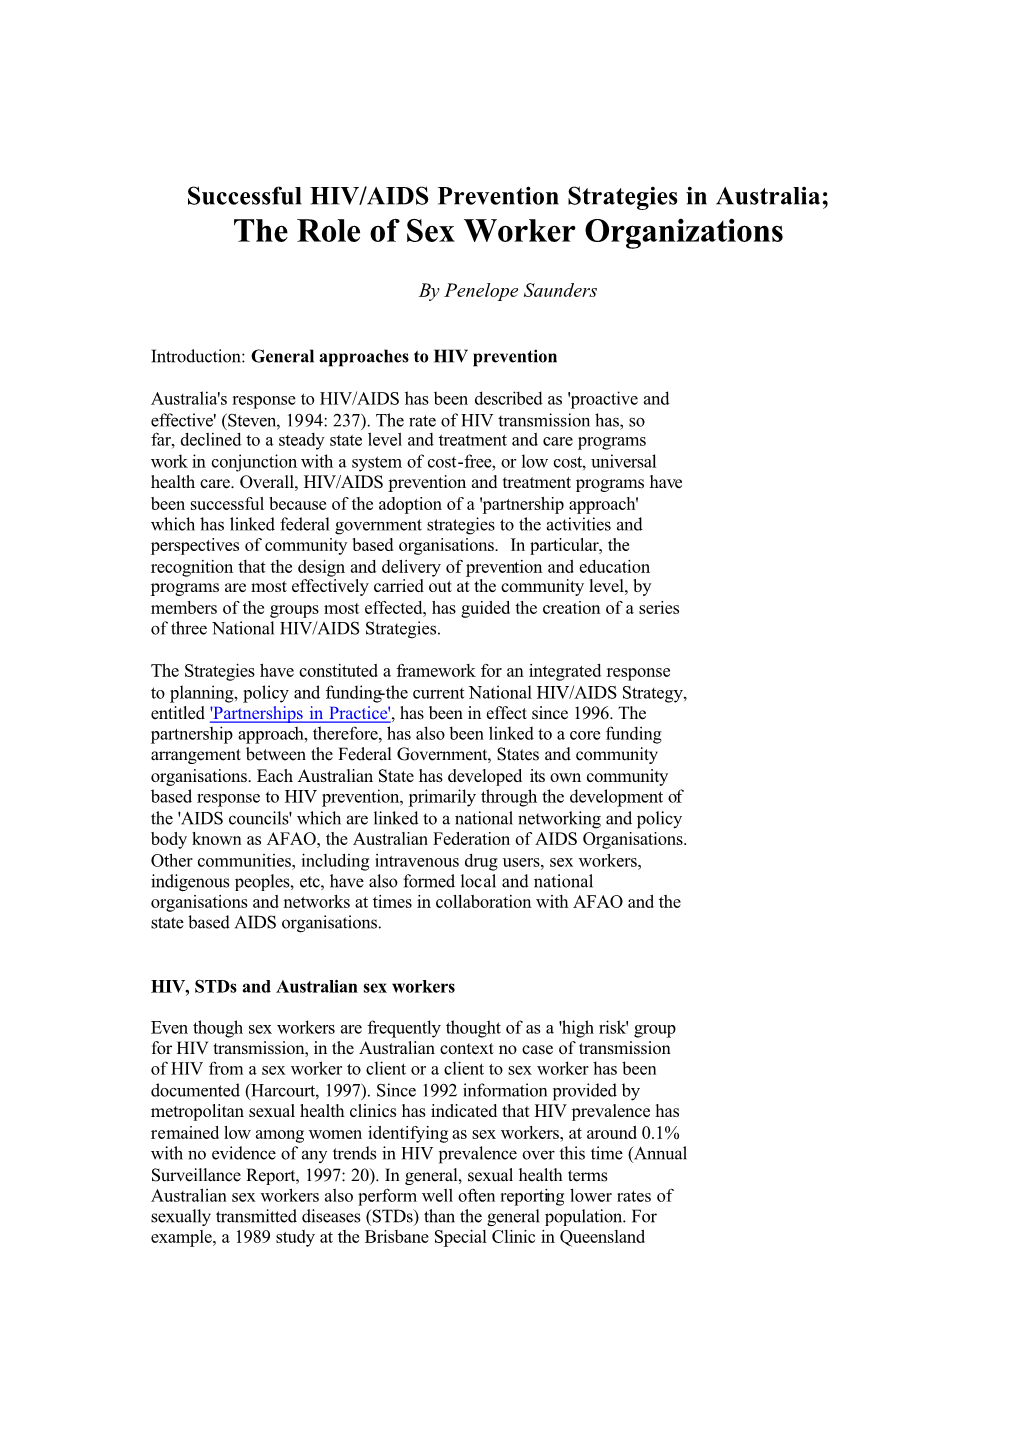 The Role of Sex Worker Organizations